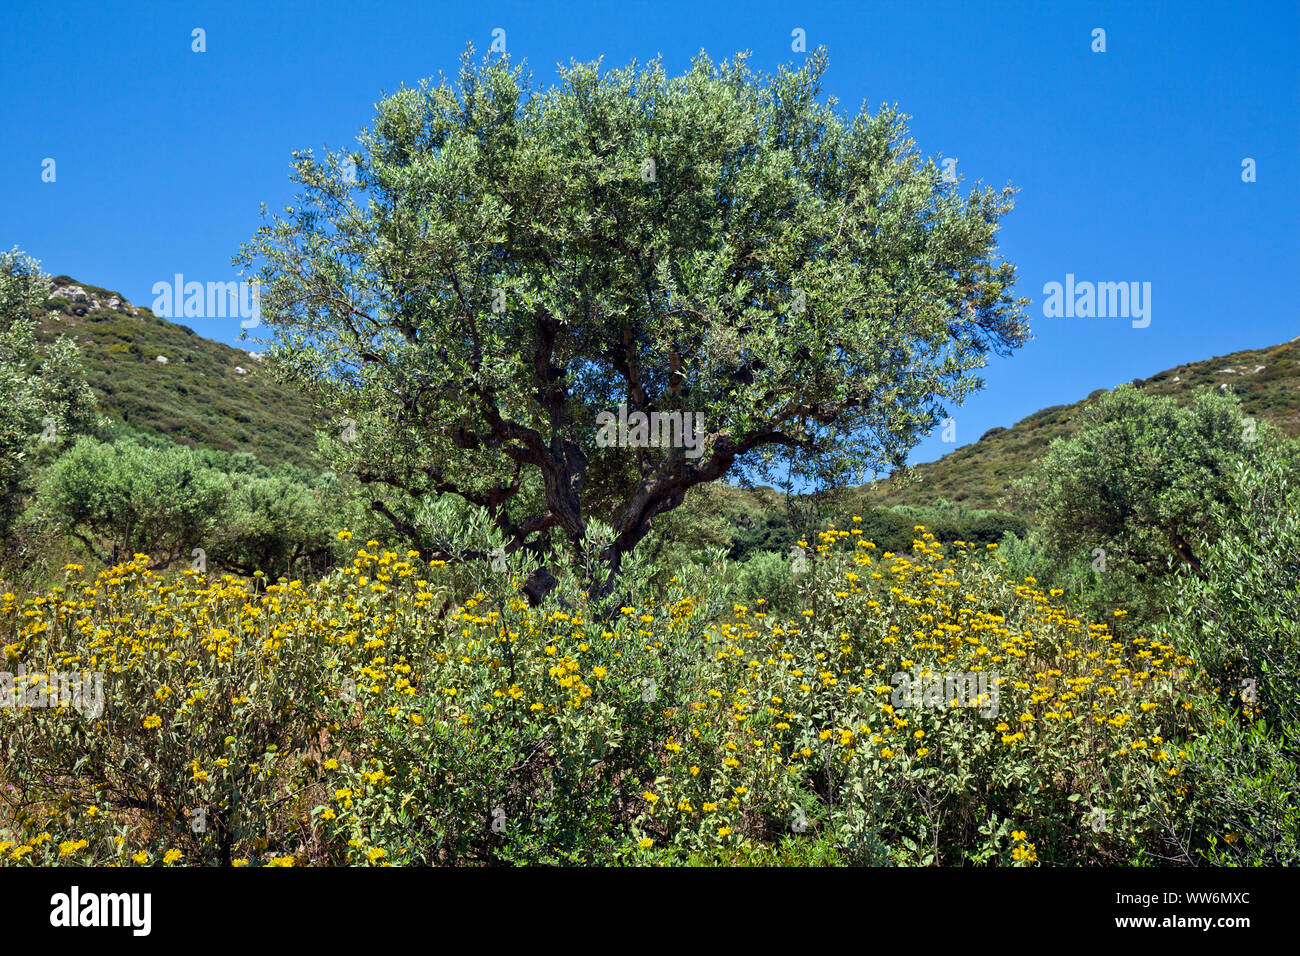 Shrubby phlomis flowers in front of olive tree in Greece Stock Photo